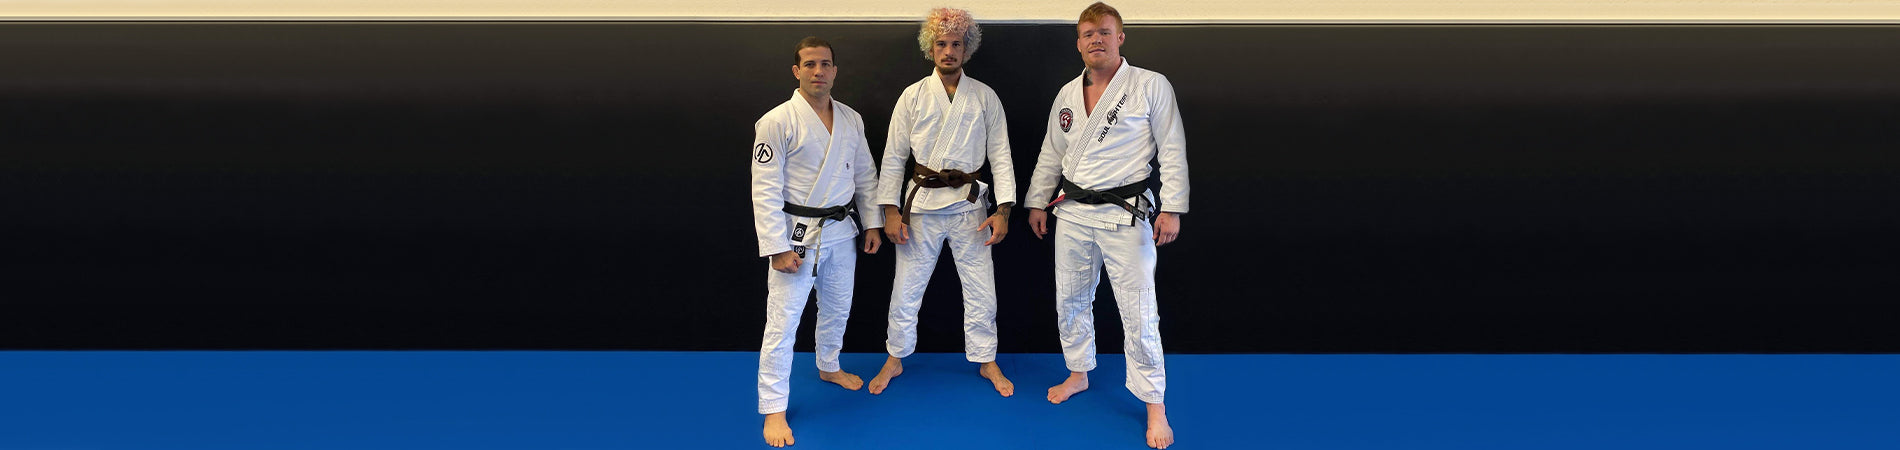 Sean O’Malley “Sugar” Spoke About His Participation in BJJ Tournament in a Recent Interview